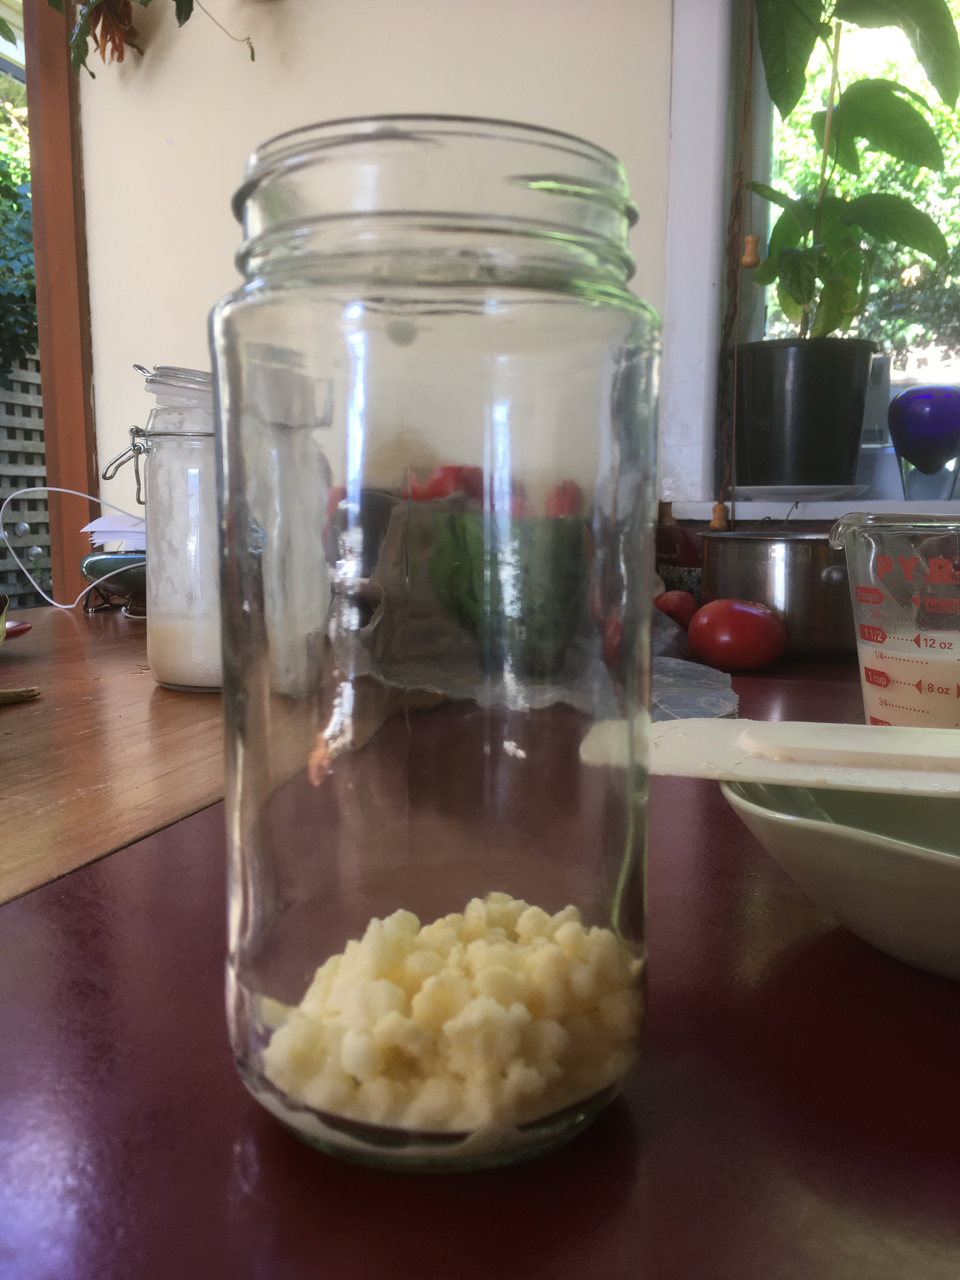 Closeup view of Kefir granules sitting in a clean glass jar. The jar is sitting on a kitchen bench that has a variety of fruit, utensils and potted plants in the background. 